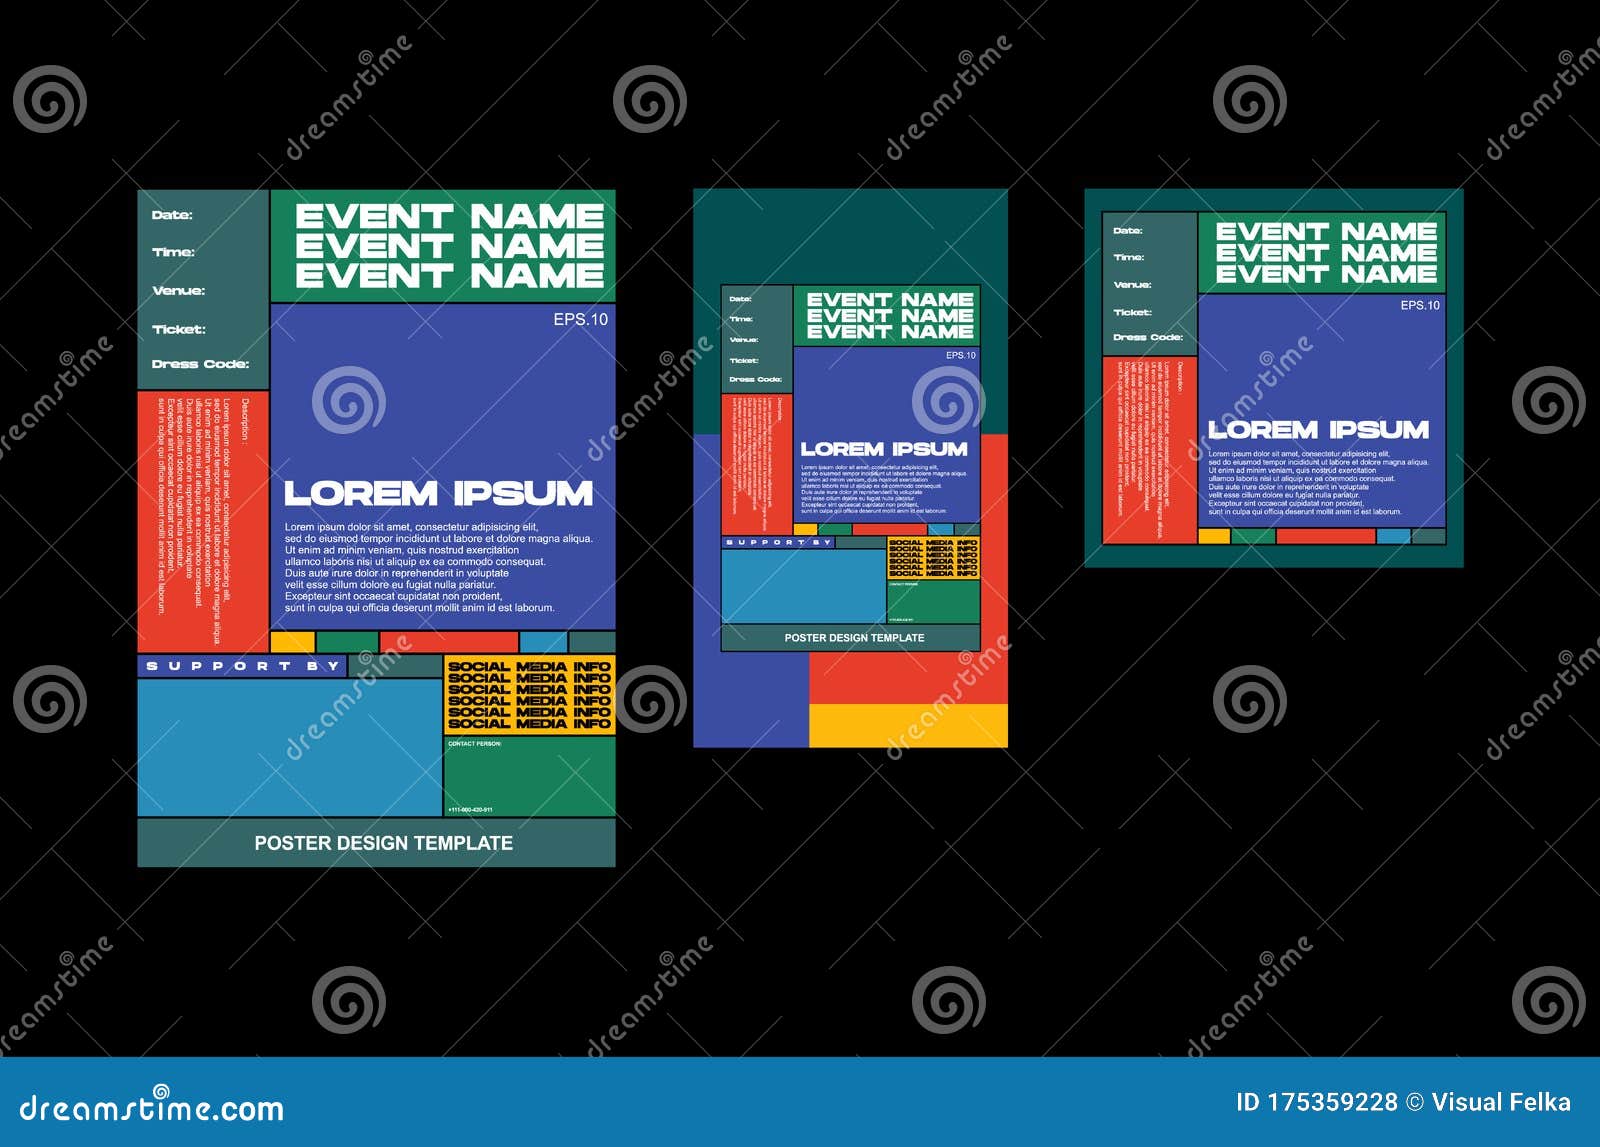 Creative Poster Template And Cover Template For Event Magazine Print Instagram Story Feed Instagram Web Banner Branding Etc Stock Vector Illustration Of Graphic Card